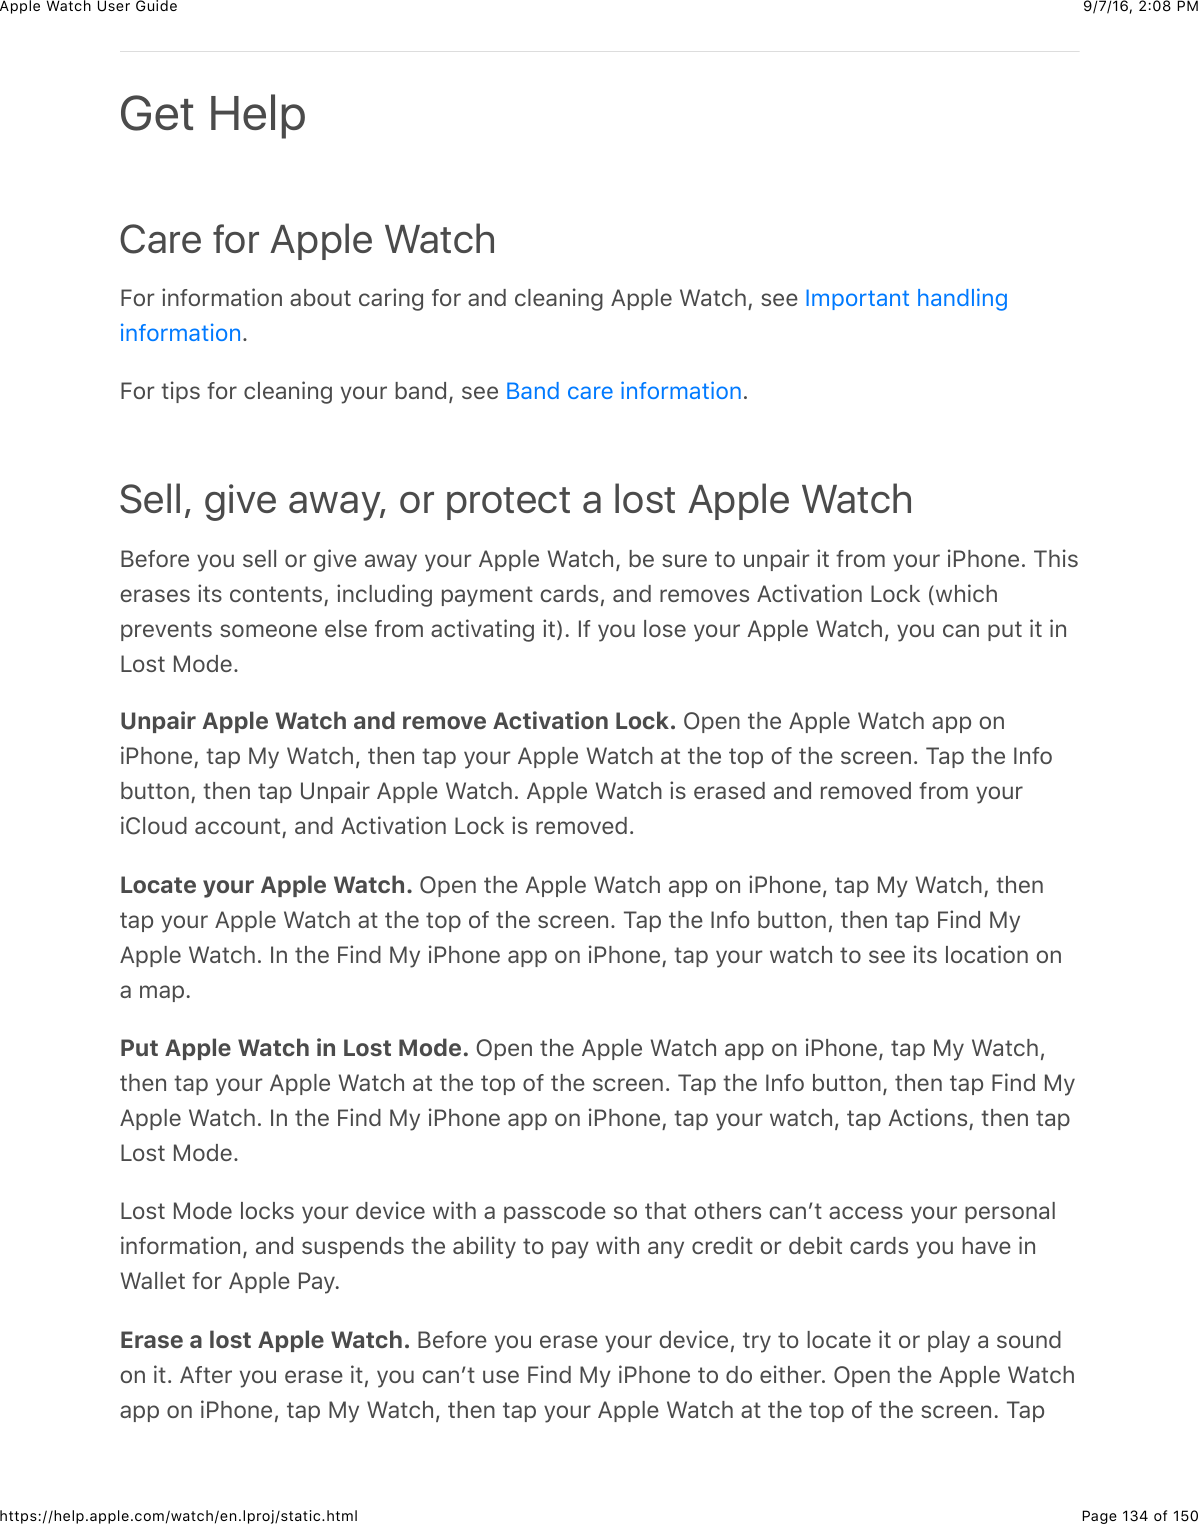 9/7/16, 2)08 PMApple Watch User GuidePage 134 of 150https://help.apple.com/watch/en.lproj/static.htmlCare for Apple WatchE#*&amp;+,@#*5&apos;3+#,&amp;&apos;B#43&amp;(&apos;*+,-&amp;@#*&amp;&apos;,0&amp;(&quot;%&apos;,+,-&amp;=22&quot;%&amp;&gt;&apos;3()J&amp;$%%&amp;CE#*&amp;3+2$&amp;@#*&amp;(&quot;%&apos;,+,-&amp;/#4*&amp;B&apos;,0J&amp;$%%&amp; CSell, give away, or protect a lost Apple Watch;%@#*%&amp;/#4&amp;$%&quot;&quot;&amp;#*&amp;-+.%&amp;&apos;7&apos;/&amp;/#4*&amp;=22&quot;%&amp;&gt;&apos;3()J&amp;B%&amp;$4*%&amp;3#&amp;4,2&apos;+*&amp;+3&amp;@*#5&amp;/#4*&amp;+G)#,%C&amp;1)+$%*&apos;$%$&amp;+3$&amp;(#,3%,3$J&amp;+,(&quot;40+,-&amp;2&apos;/5%,3&amp;(&apos;*0$J&amp;&apos;,0&amp;*%5#.%$&amp;=(3+.&apos;3+#,&amp;&lt;#(8&amp;P7)+()2*%.%,3$&amp;$#5%#,%&amp;%&quot;$%&amp;@*#5&amp;&apos;(3+.&apos;3+,-&amp;+3RC&amp;Y@&amp;/#4&amp;&quot;#$%&amp;/#4*&amp;=22&quot;%&amp;&gt;&apos;3()J&amp;/#4&amp;(&apos;,&amp;243&amp;+3&amp;+,&lt;#$3&amp;F#0%CUnpair Apple Watch and remove Activation Lock. L2%,&amp;3)%&amp;=22&quot;%&amp;&gt;&apos;3()&amp;&apos;22&amp;#,+G)#,%J&amp;3&apos;2&amp;F/&amp;&gt;&apos;3()J&amp;3)%,&amp;3&apos;2&amp;/#4*&amp;=22&quot;%&amp;&gt;&apos;3()&amp;&apos;3&amp;3)%&amp;3#2&amp;#@&amp;3)%&amp;$(*%%,C&amp;1&apos;2&amp;3)%&amp;Y,@#B433#,J&amp;3)%,&amp;3&apos;2&amp;K,2&apos;+*&amp;=22&quot;%&amp;&gt;&apos;3()C&amp;=22&quot;%&amp;&gt;&apos;3()&amp;+$&amp;%*&apos;$%0&amp;&apos;,0&amp;*%5#.%0&amp;@*#5&amp;/#4*+!&quot;#40&amp;&apos;((#4,3J&amp;&apos;,0&amp;=(3+.&apos;3+#,&amp;&lt;#(8&amp;+$&amp;*%5#.%0CLocate your Apple Watch. L2%,&amp;3)%&amp;=22&quot;%&amp;&gt;&apos;3()&amp;&apos;22&amp;#,&amp;+G)#,%J&amp;3&apos;2&amp;F/&amp;&gt;&apos;3()J&amp;3)%,3&apos;2&amp;/#4*&amp;=22&quot;%&amp;&gt;&apos;3()&amp;&apos;3&amp;3)%&amp;3#2&amp;#@&amp;3)%&amp;$(*%%,C&amp;1&apos;2&amp;3)%&amp;Y,@#&amp;B433#,J&amp;3)%,&amp;3&apos;2&amp;E+,0&amp;F/=22&quot;%&amp;&gt;&apos;3()C&amp;Y,&amp;3)%&amp;E+,0&amp;F/&amp;+G)#,%&amp;&apos;22&amp;#,&amp;+G)#,%J&amp;3&apos;2&amp;/#4*&amp;7&apos;3()&amp;3#&amp;$%%&amp;+3$&amp;&quot;#(&apos;3+#,&amp;#,&apos;&amp;5&apos;2CPut Apple Watch in Lost Mode. L2%,&amp;3)%&amp;=22&quot;%&amp;&gt;&apos;3()&amp;&apos;22&amp;#,&amp;+G)#,%J&amp;3&apos;2&amp;F/&amp;&gt;&apos;3()J3)%,&amp;3&apos;2&amp;/#4*&amp;=22&quot;%&amp;&gt;&apos;3()&amp;&apos;3&amp;3)%&amp;3#2&amp;#@&amp;3)%&amp;$(*%%,C&amp;1&apos;2&amp;3)%&amp;Y,@#&amp;B433#,J&amp;3)%,&amp;3&apos;2&amp;E+,0&amp;F/=22&quot;%&amp;&gt;&apos;3()C&amp;Y,&amp;3)%&amp;E+,0&amp;F/&amp;+G)#,%&amp;&apos;22&amp;#,&amp;+G)#,%J&amp;3&apos;2&amp;/#4*&amp;7&apos;3()J&amp;3&apos;2&amp;=(3+#,$J&amp;3)%,&amp;3&apos;2&lt;#$3&amp;F#0%C&lt;#$3&amp;F#0%&amp;&quot;#(8$&amp;/#4*&amp;0%.+(%&amp;7+3)&amp;&apos;&amp;2&apos;$$(#0%&amp;$#&amp;3)&apos;3&amp;#3)%*$&amp;(&apos;,W3&amp;&apos;((%$$&amp;/#4*&amp;2%*$#,&apos;&quot;+,@#*5&apos;3+#,J&amp;&apos;,0&amp;$4$2%,0$&amp;3)%&amp;&apos;B+&quot;+3/&amp;3#&amp;2&apos;/&amp;7+3)&amp;&apos;,/&amp;(*%0+3&amp;#*&amp;0%B+3&amp;(&apos;*0$&amp;/#4&amp;)&apos;.%&amp;+,&gt;&apos;&quot;&quot;%3&amp;@#*&amp;=22&quot;%&amp;G&apos;/CErase a lost Apple Watch. ;%@#*%&amp;/#4&amp;%*&apos;$%&amp;/#4*&amp;0%.+(%J&amp;3*/&amp;3#&amp;&quot;#(&apos;3%&amp;+3&amp;#*&amp;2&quot;&apos;/&amp;&apos;&amp;$#4,0#,&amp;+3C&amp;=@3%*&amp;/#4&amp;%*&apos;$%&amp;+3J&amp;/#4&amp;(&apos;,W3&amp;4$%&amp;E+,0&amp;F/&amp;+G)#,%&amp;3#&amp;0#&amp;%+3)%*C&amp;L2%,&amp;3)%&amp;=22&quot;%&amp;&gt;&apos;3()&apos;22&amp;#,&amp;+G)#,%J&amp;3&apos;2&amp;F/&amp;&gt;&apos;3()J&amp;3)%,&amp;3&apos;2&amp;/#4*&amp;=22&quot;%&amp;&gt;&apos;3()&amp;&apos;3&amp;3)%&amp;3#2&amp;#@&amp;3)%&amp;$(*%%,C&amp;1&apos;2Get HelpY52#*3&apos;,3&amp;)&apos;,0&quot;+,-+,@#*5&apos;3+#,;&apos;,0&amp;(&apos;*%&amp;+,@#*5&apos;3+#,